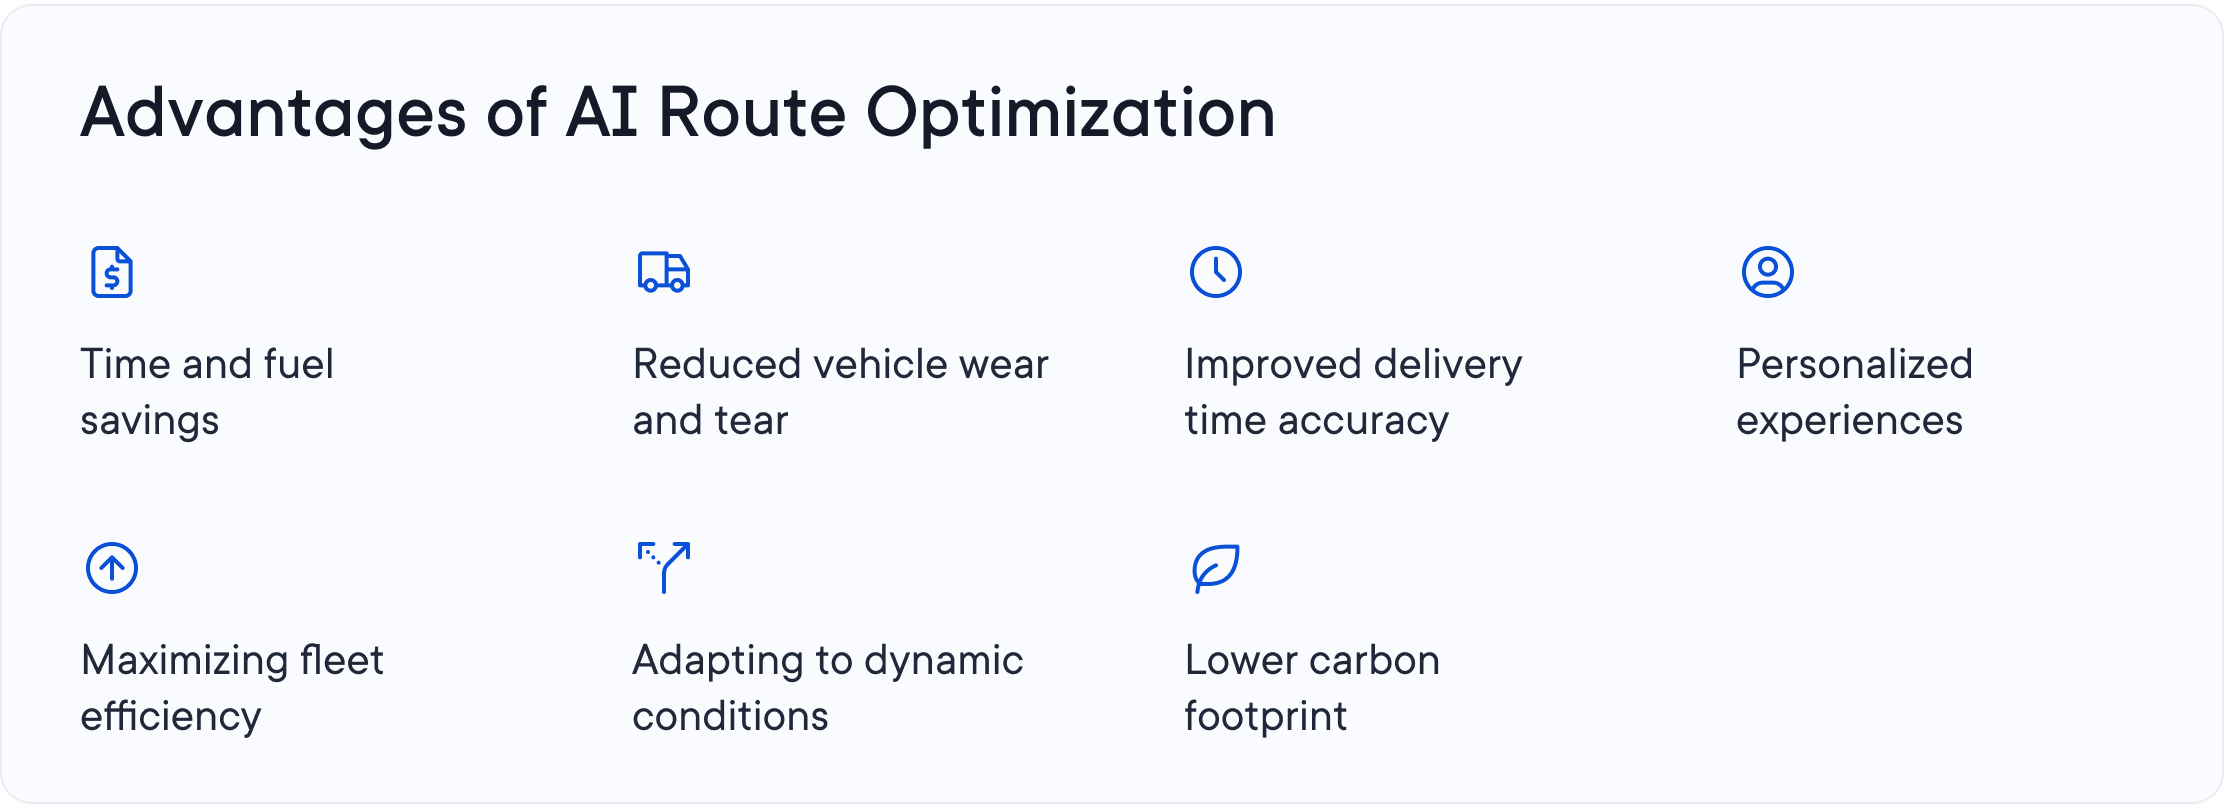 A list of all the advantages of AI route optimization